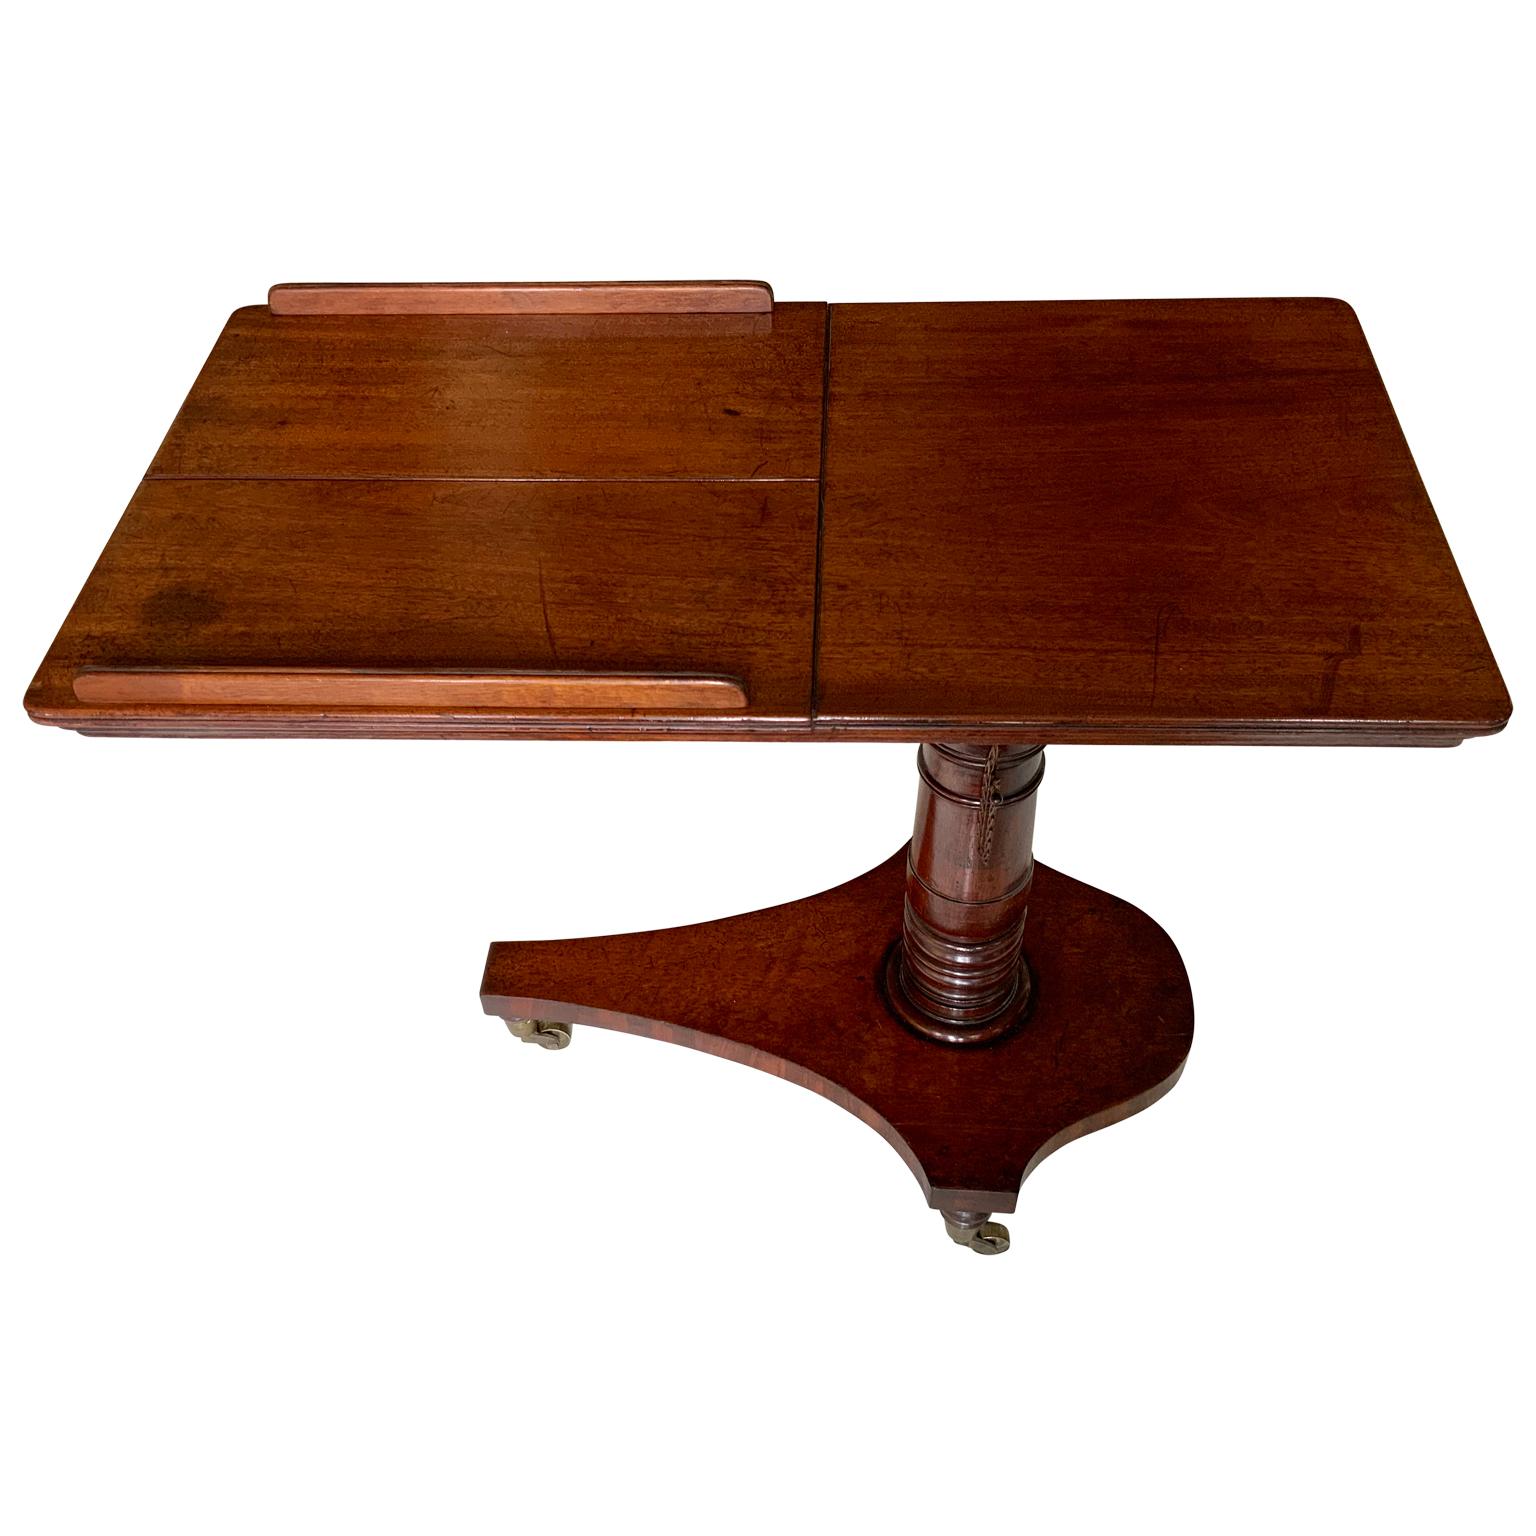 Brass English Mahogany Adjustable Reading or Musical Table Stand